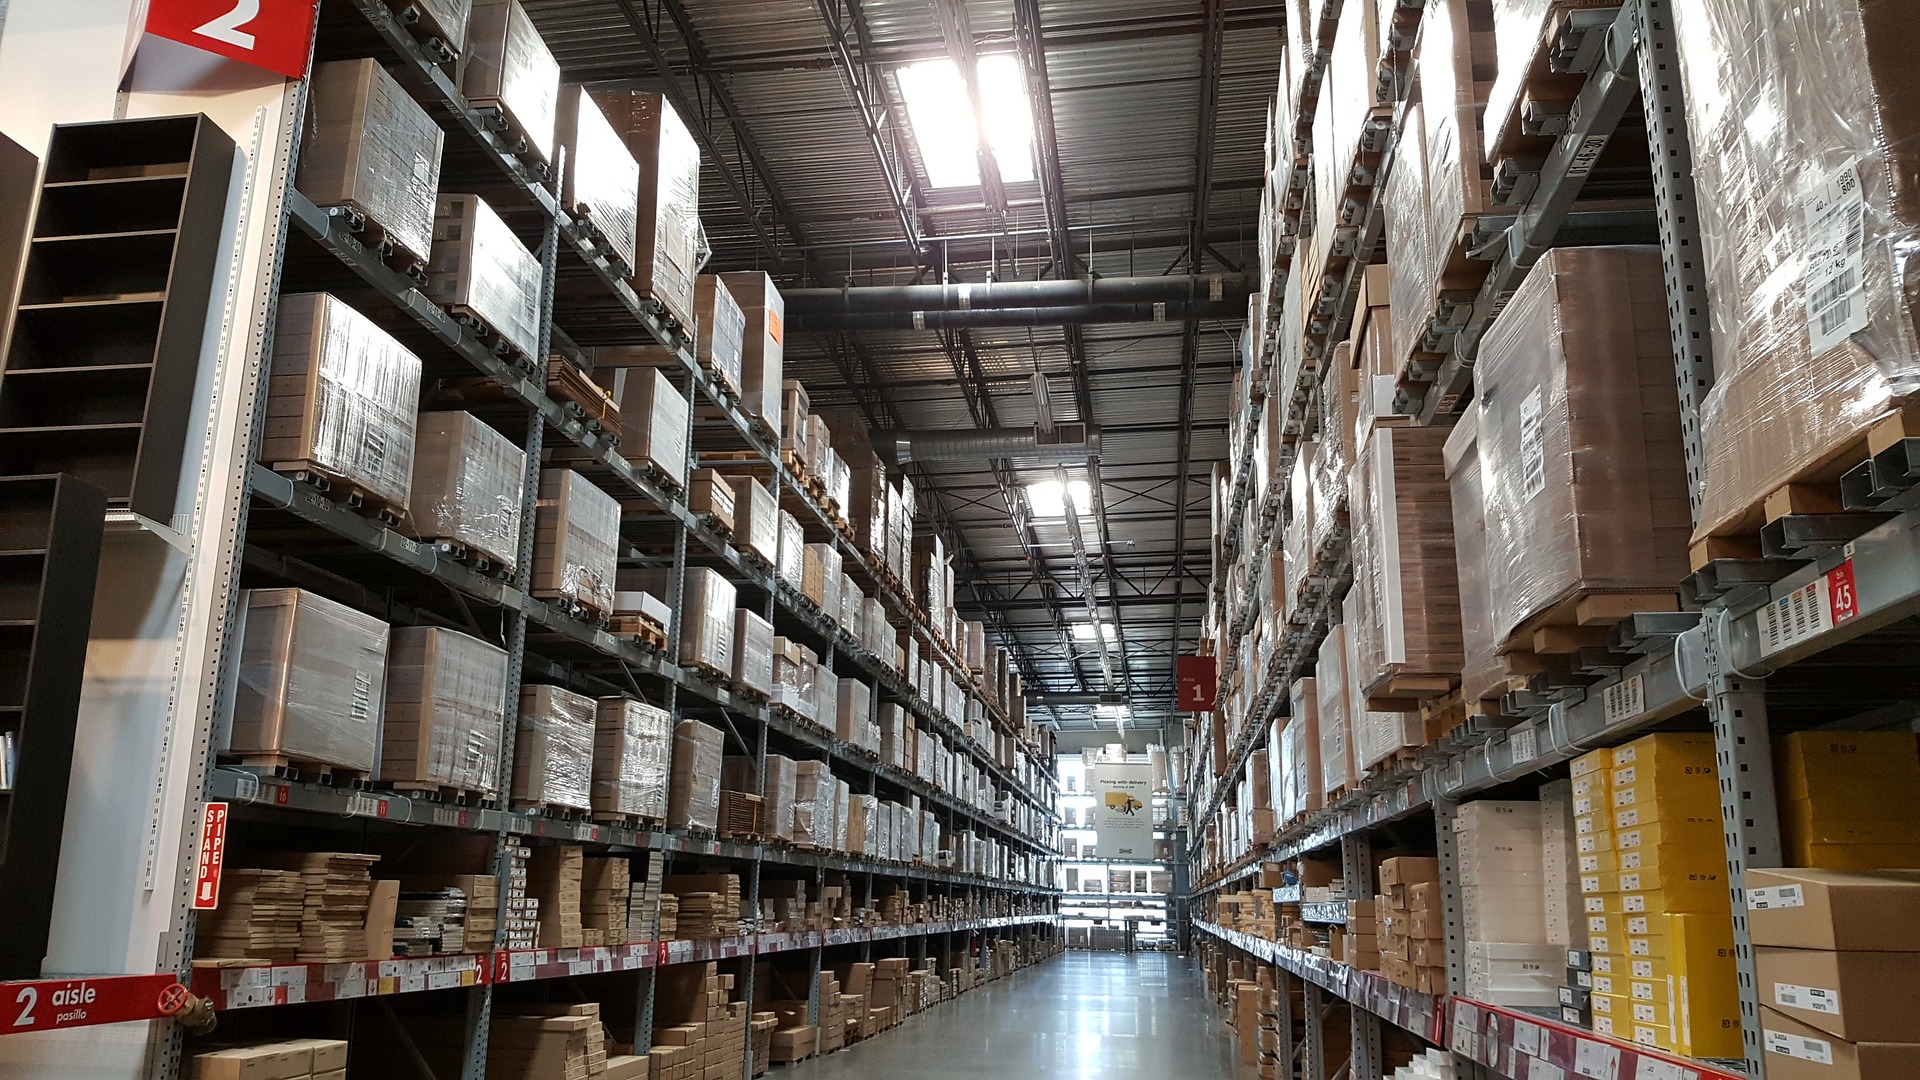 A warehouse with shelves filled with boxes floor to ceiling.